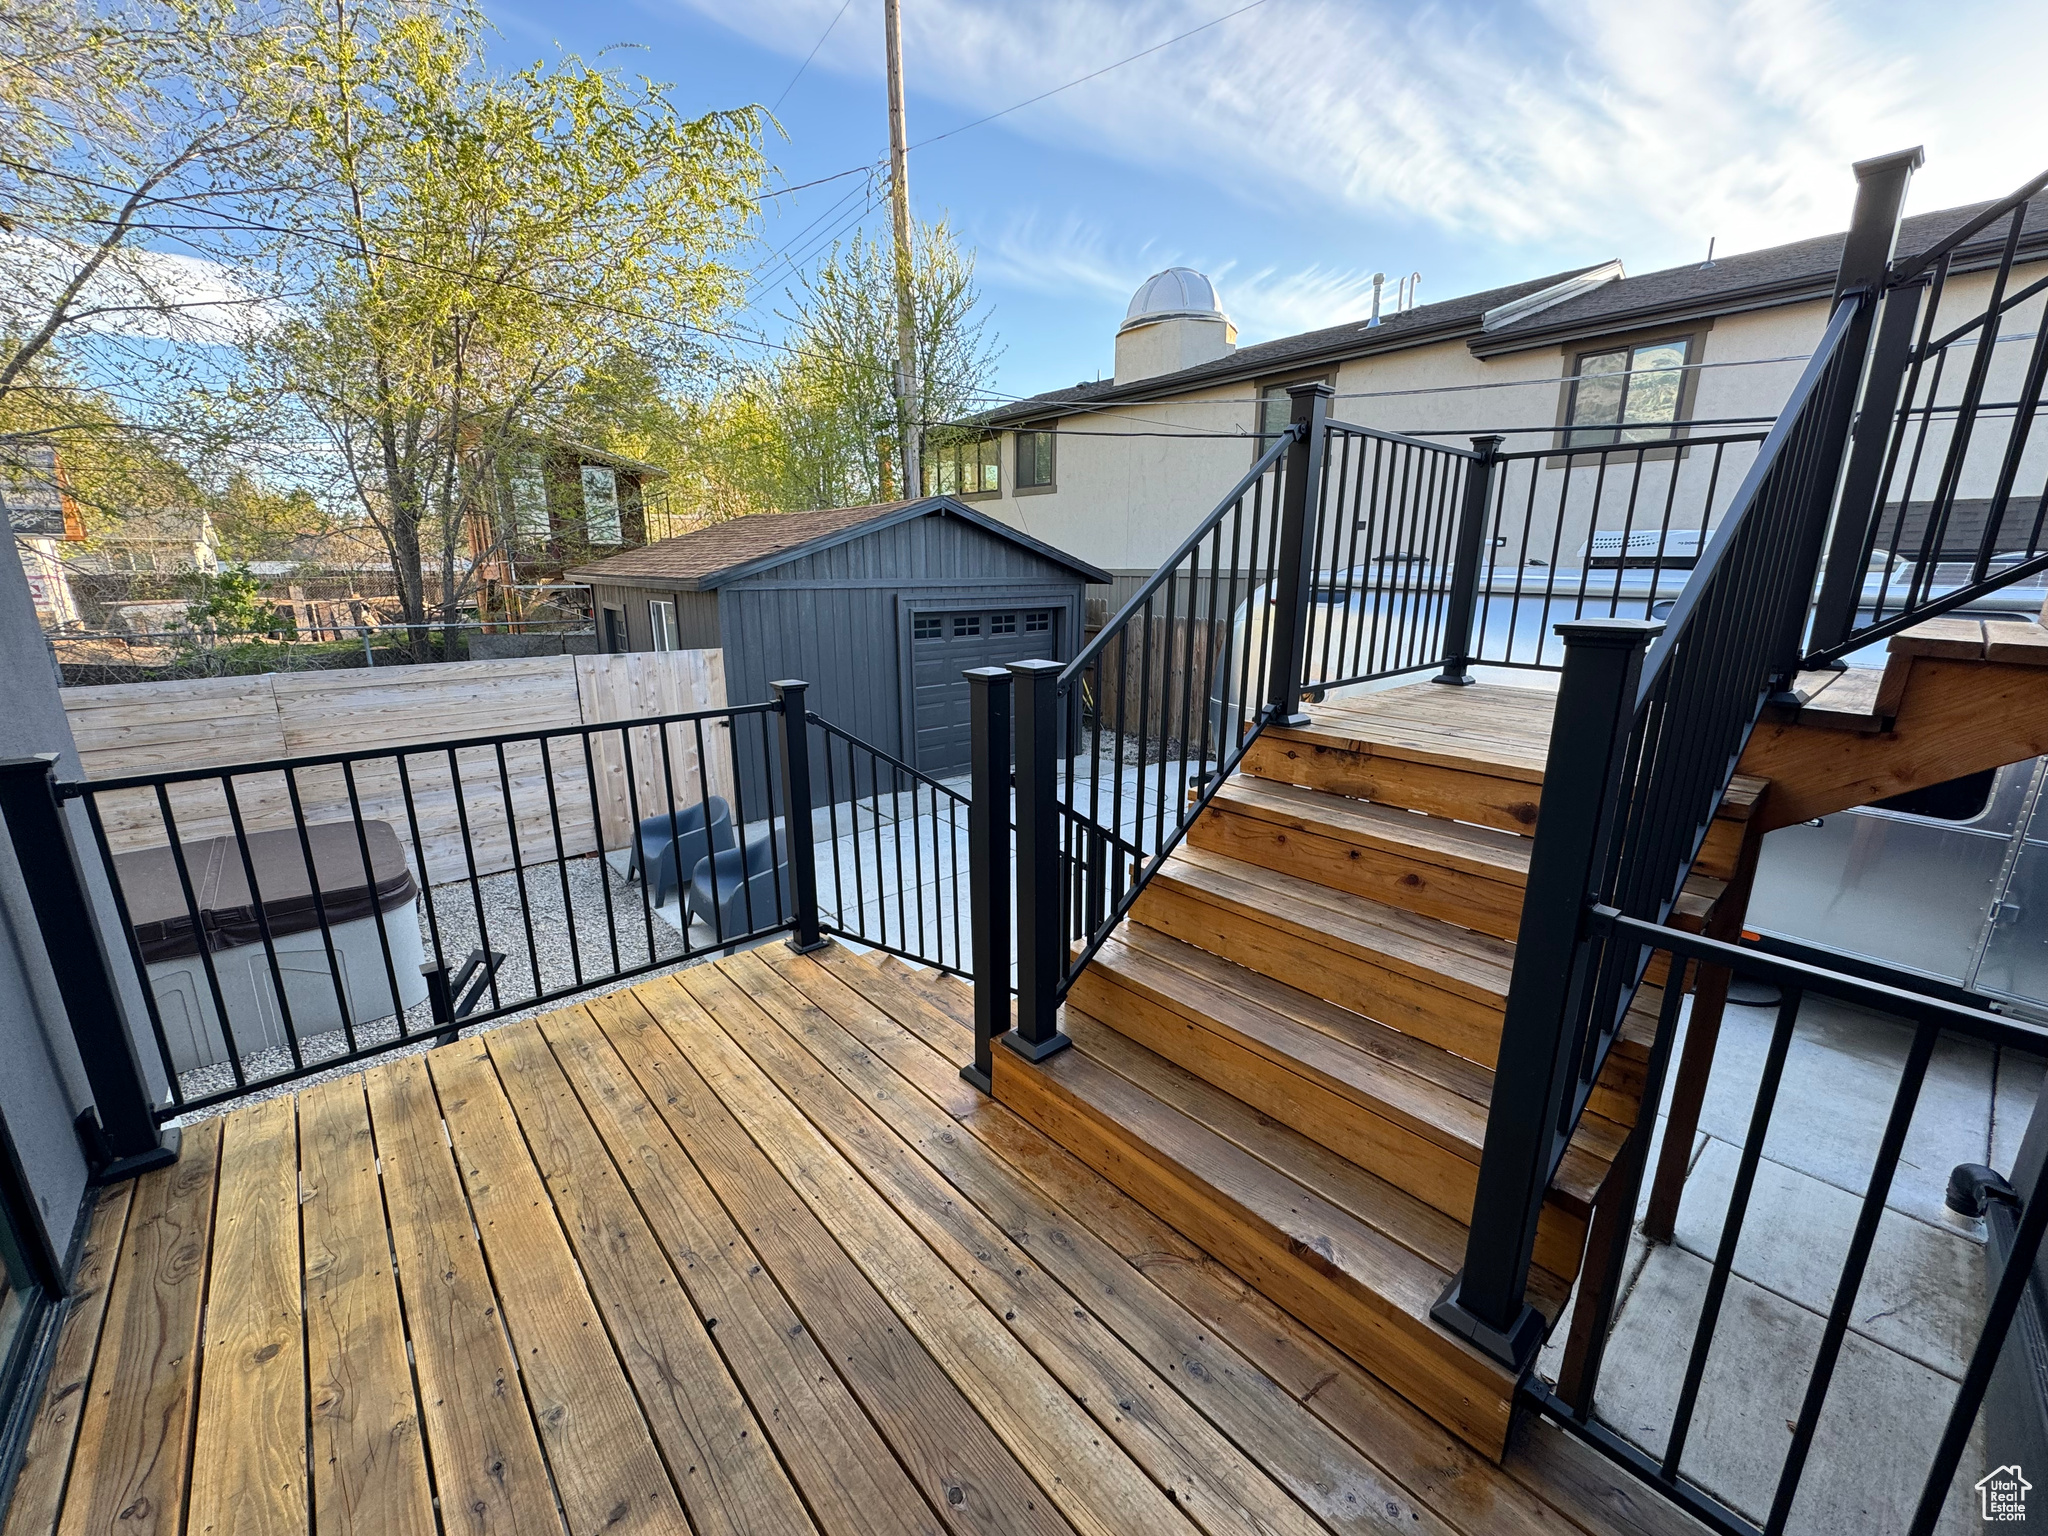 Deck featuring an outdoor structure